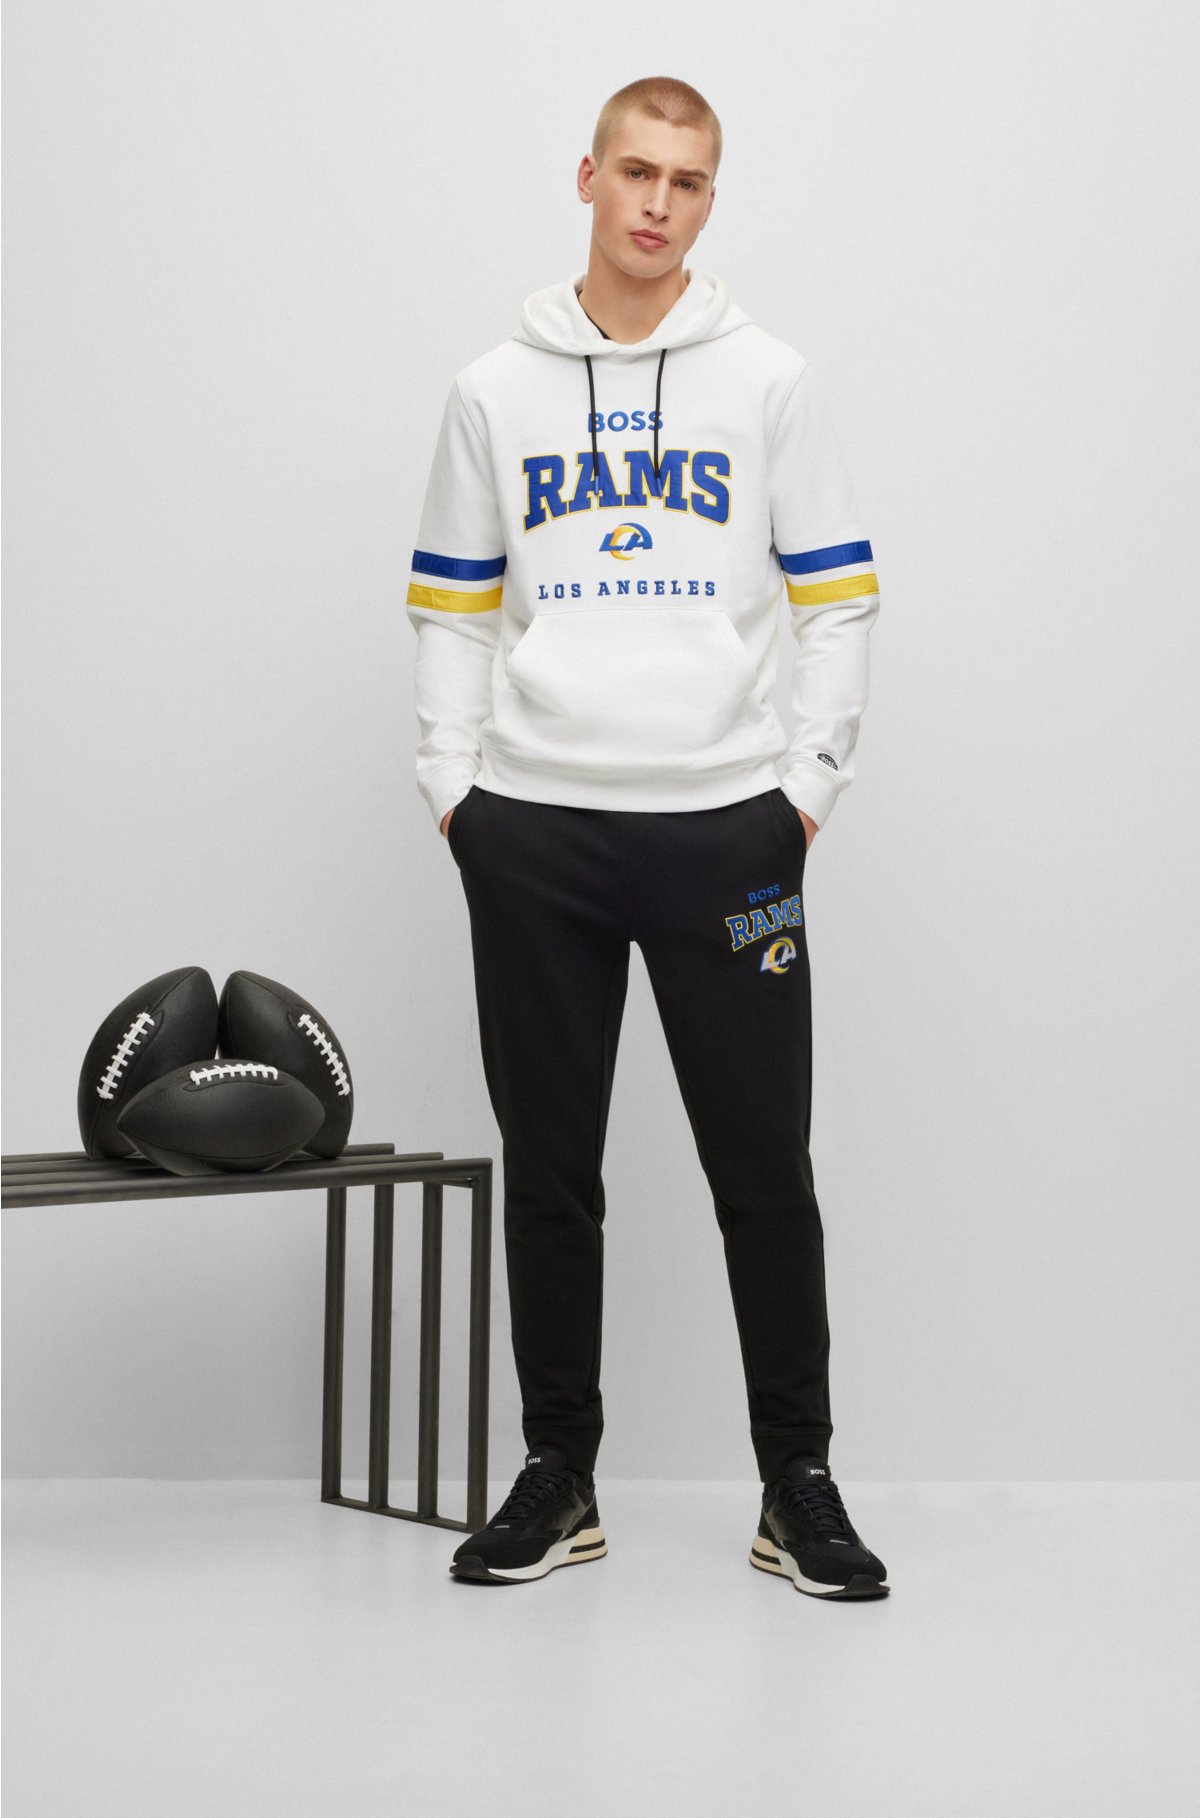 BOSS x NFL cotton-terry tracksuit bottoms with collaborative branding, Rams